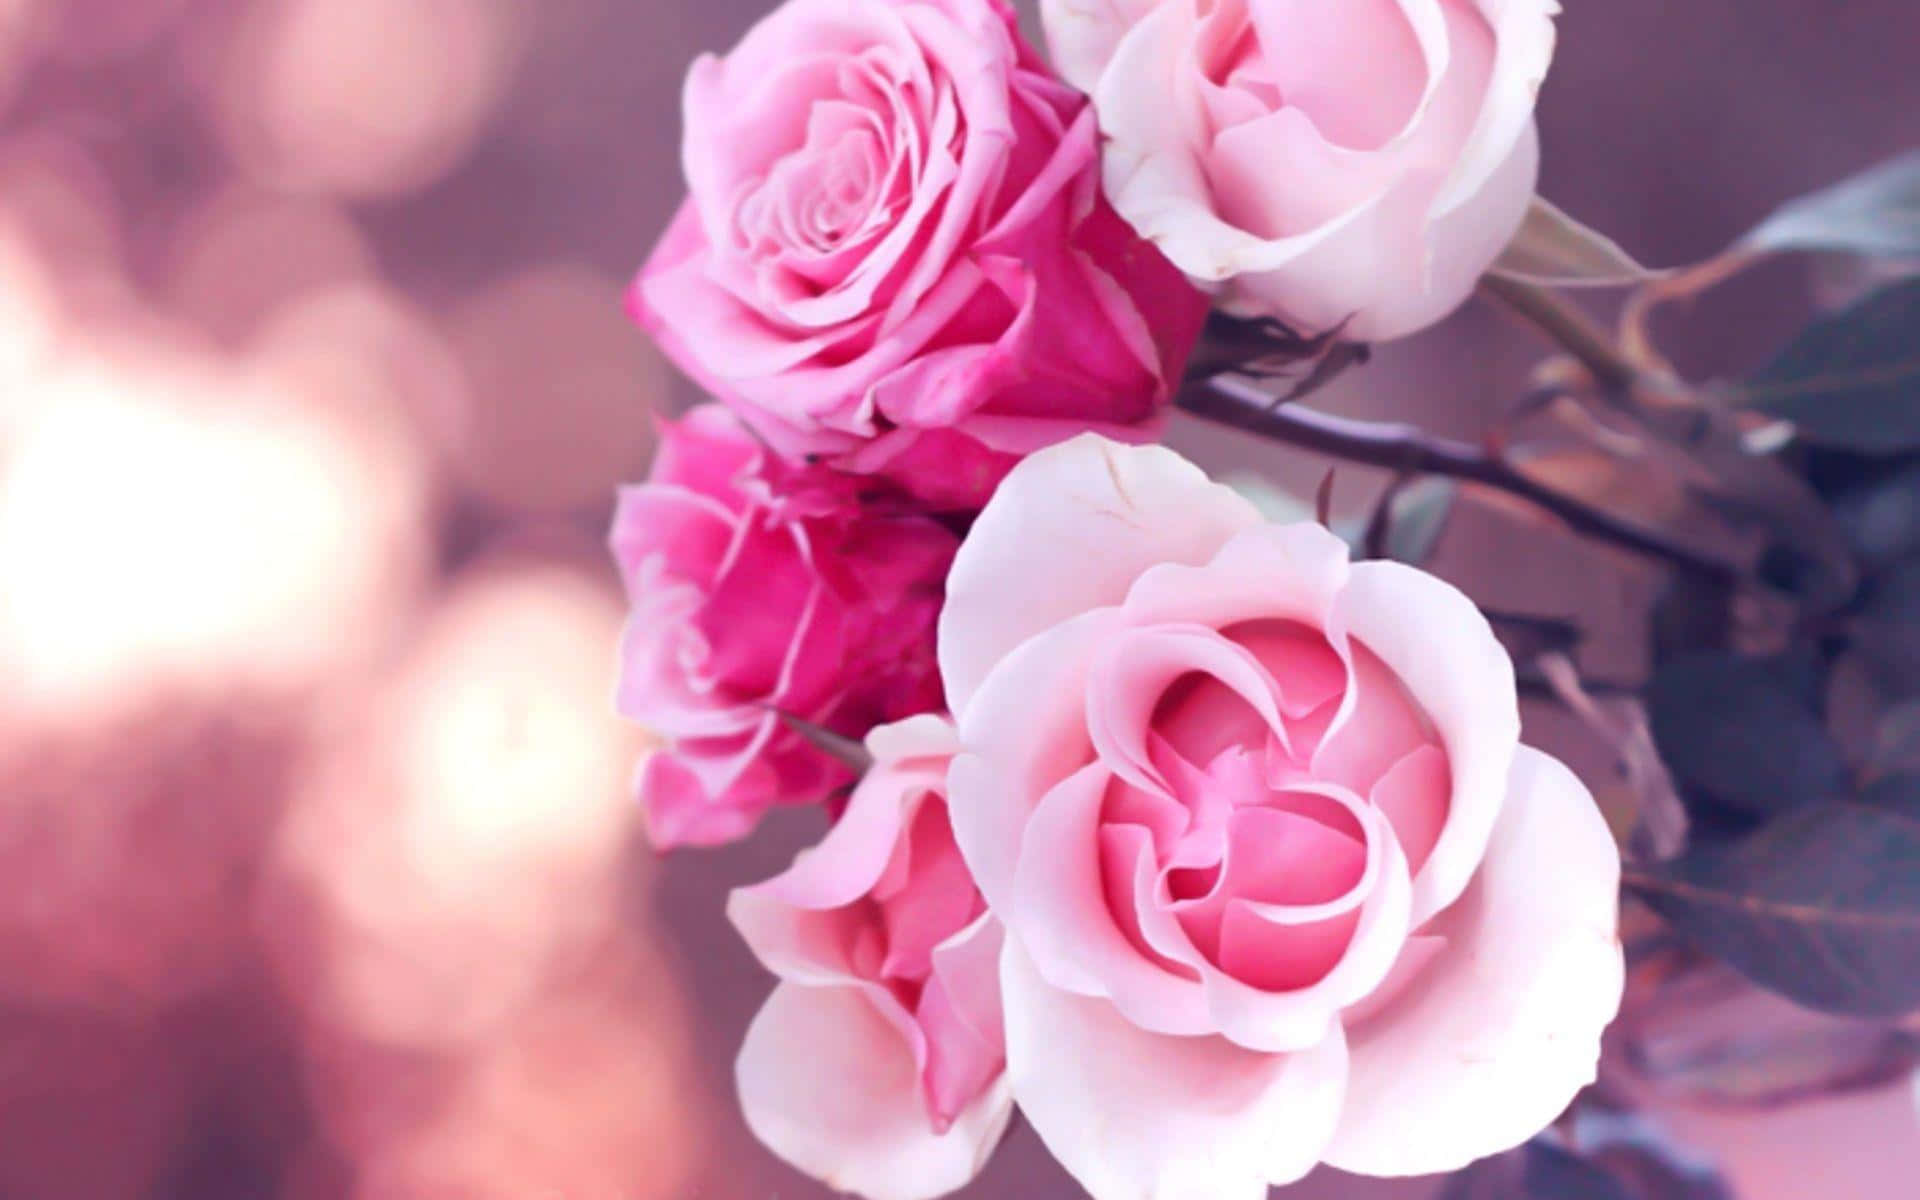 Brighten up your space with this beautiful pink rose